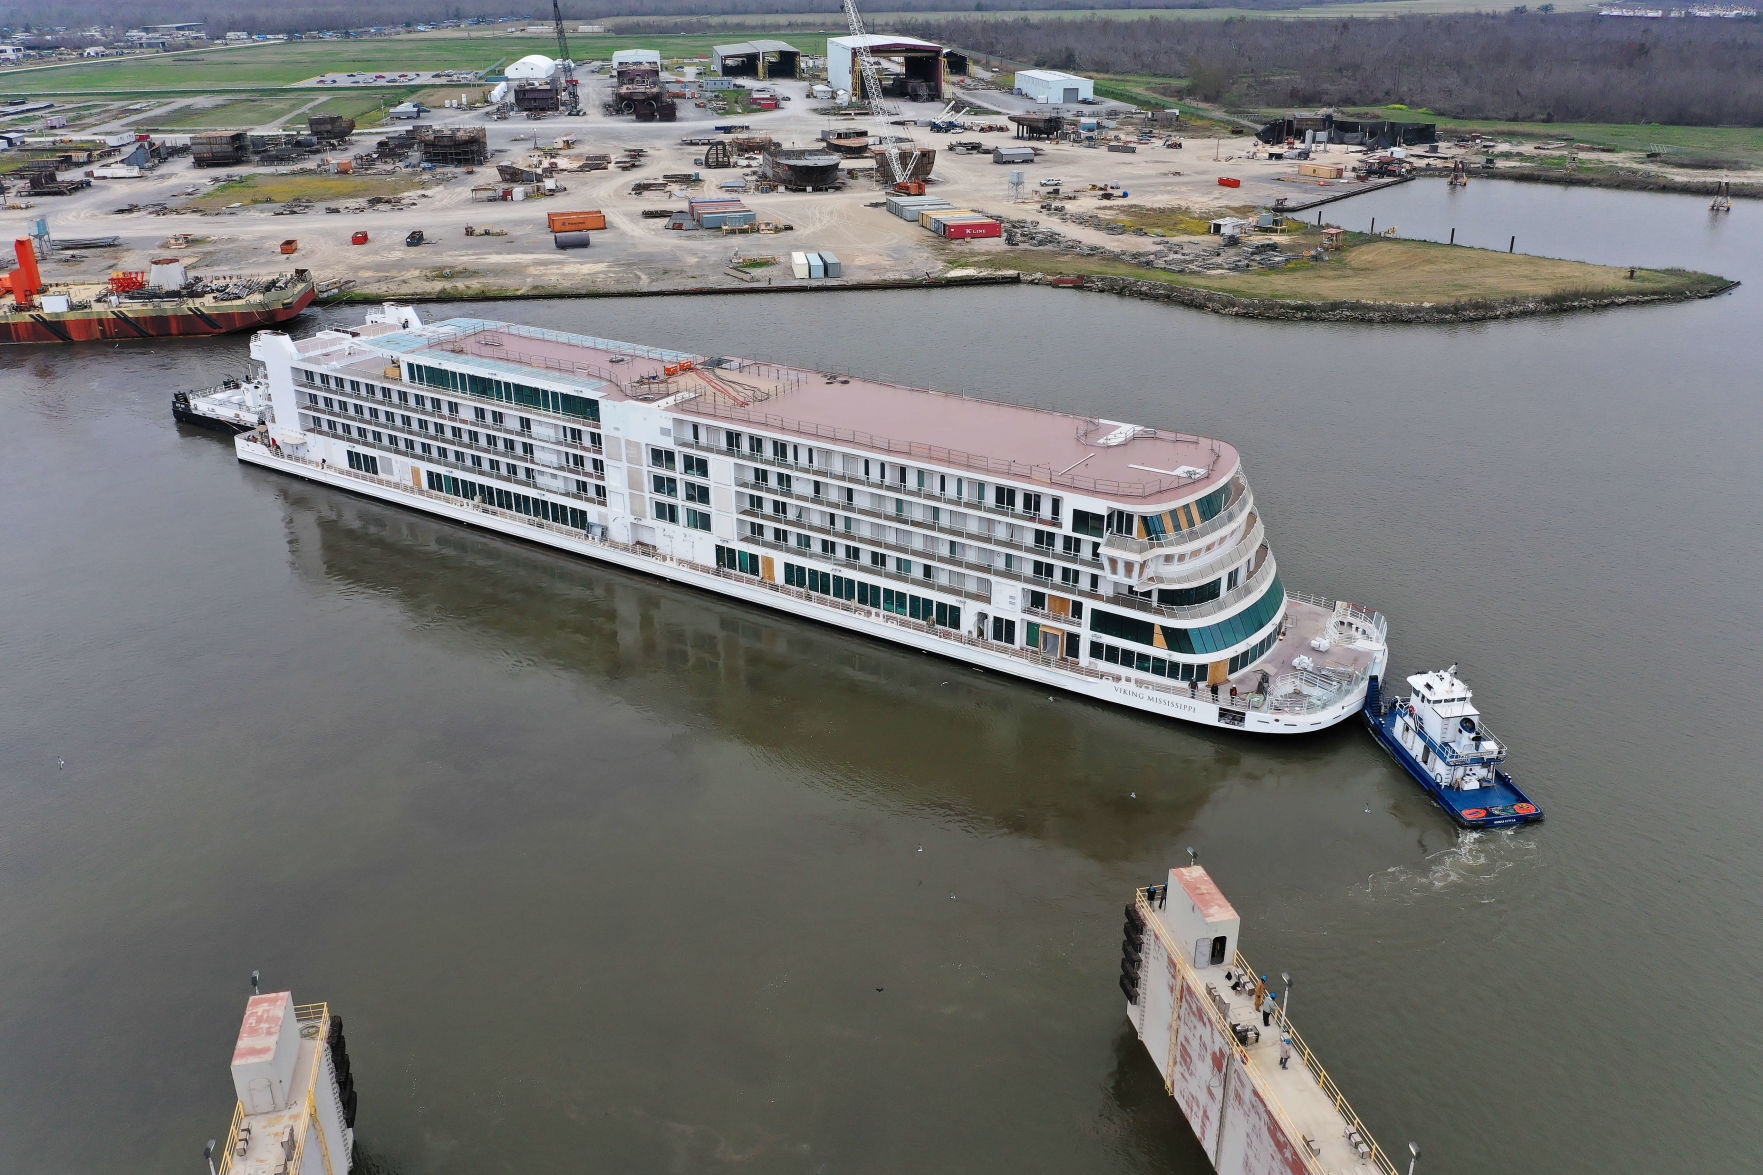 The Viking Mississippi ship had its "float out" this week in Louisiana. The company will launch Mississippi River tours this summer that include stops in Dubuque.     PHOTO CREDIT: Viking